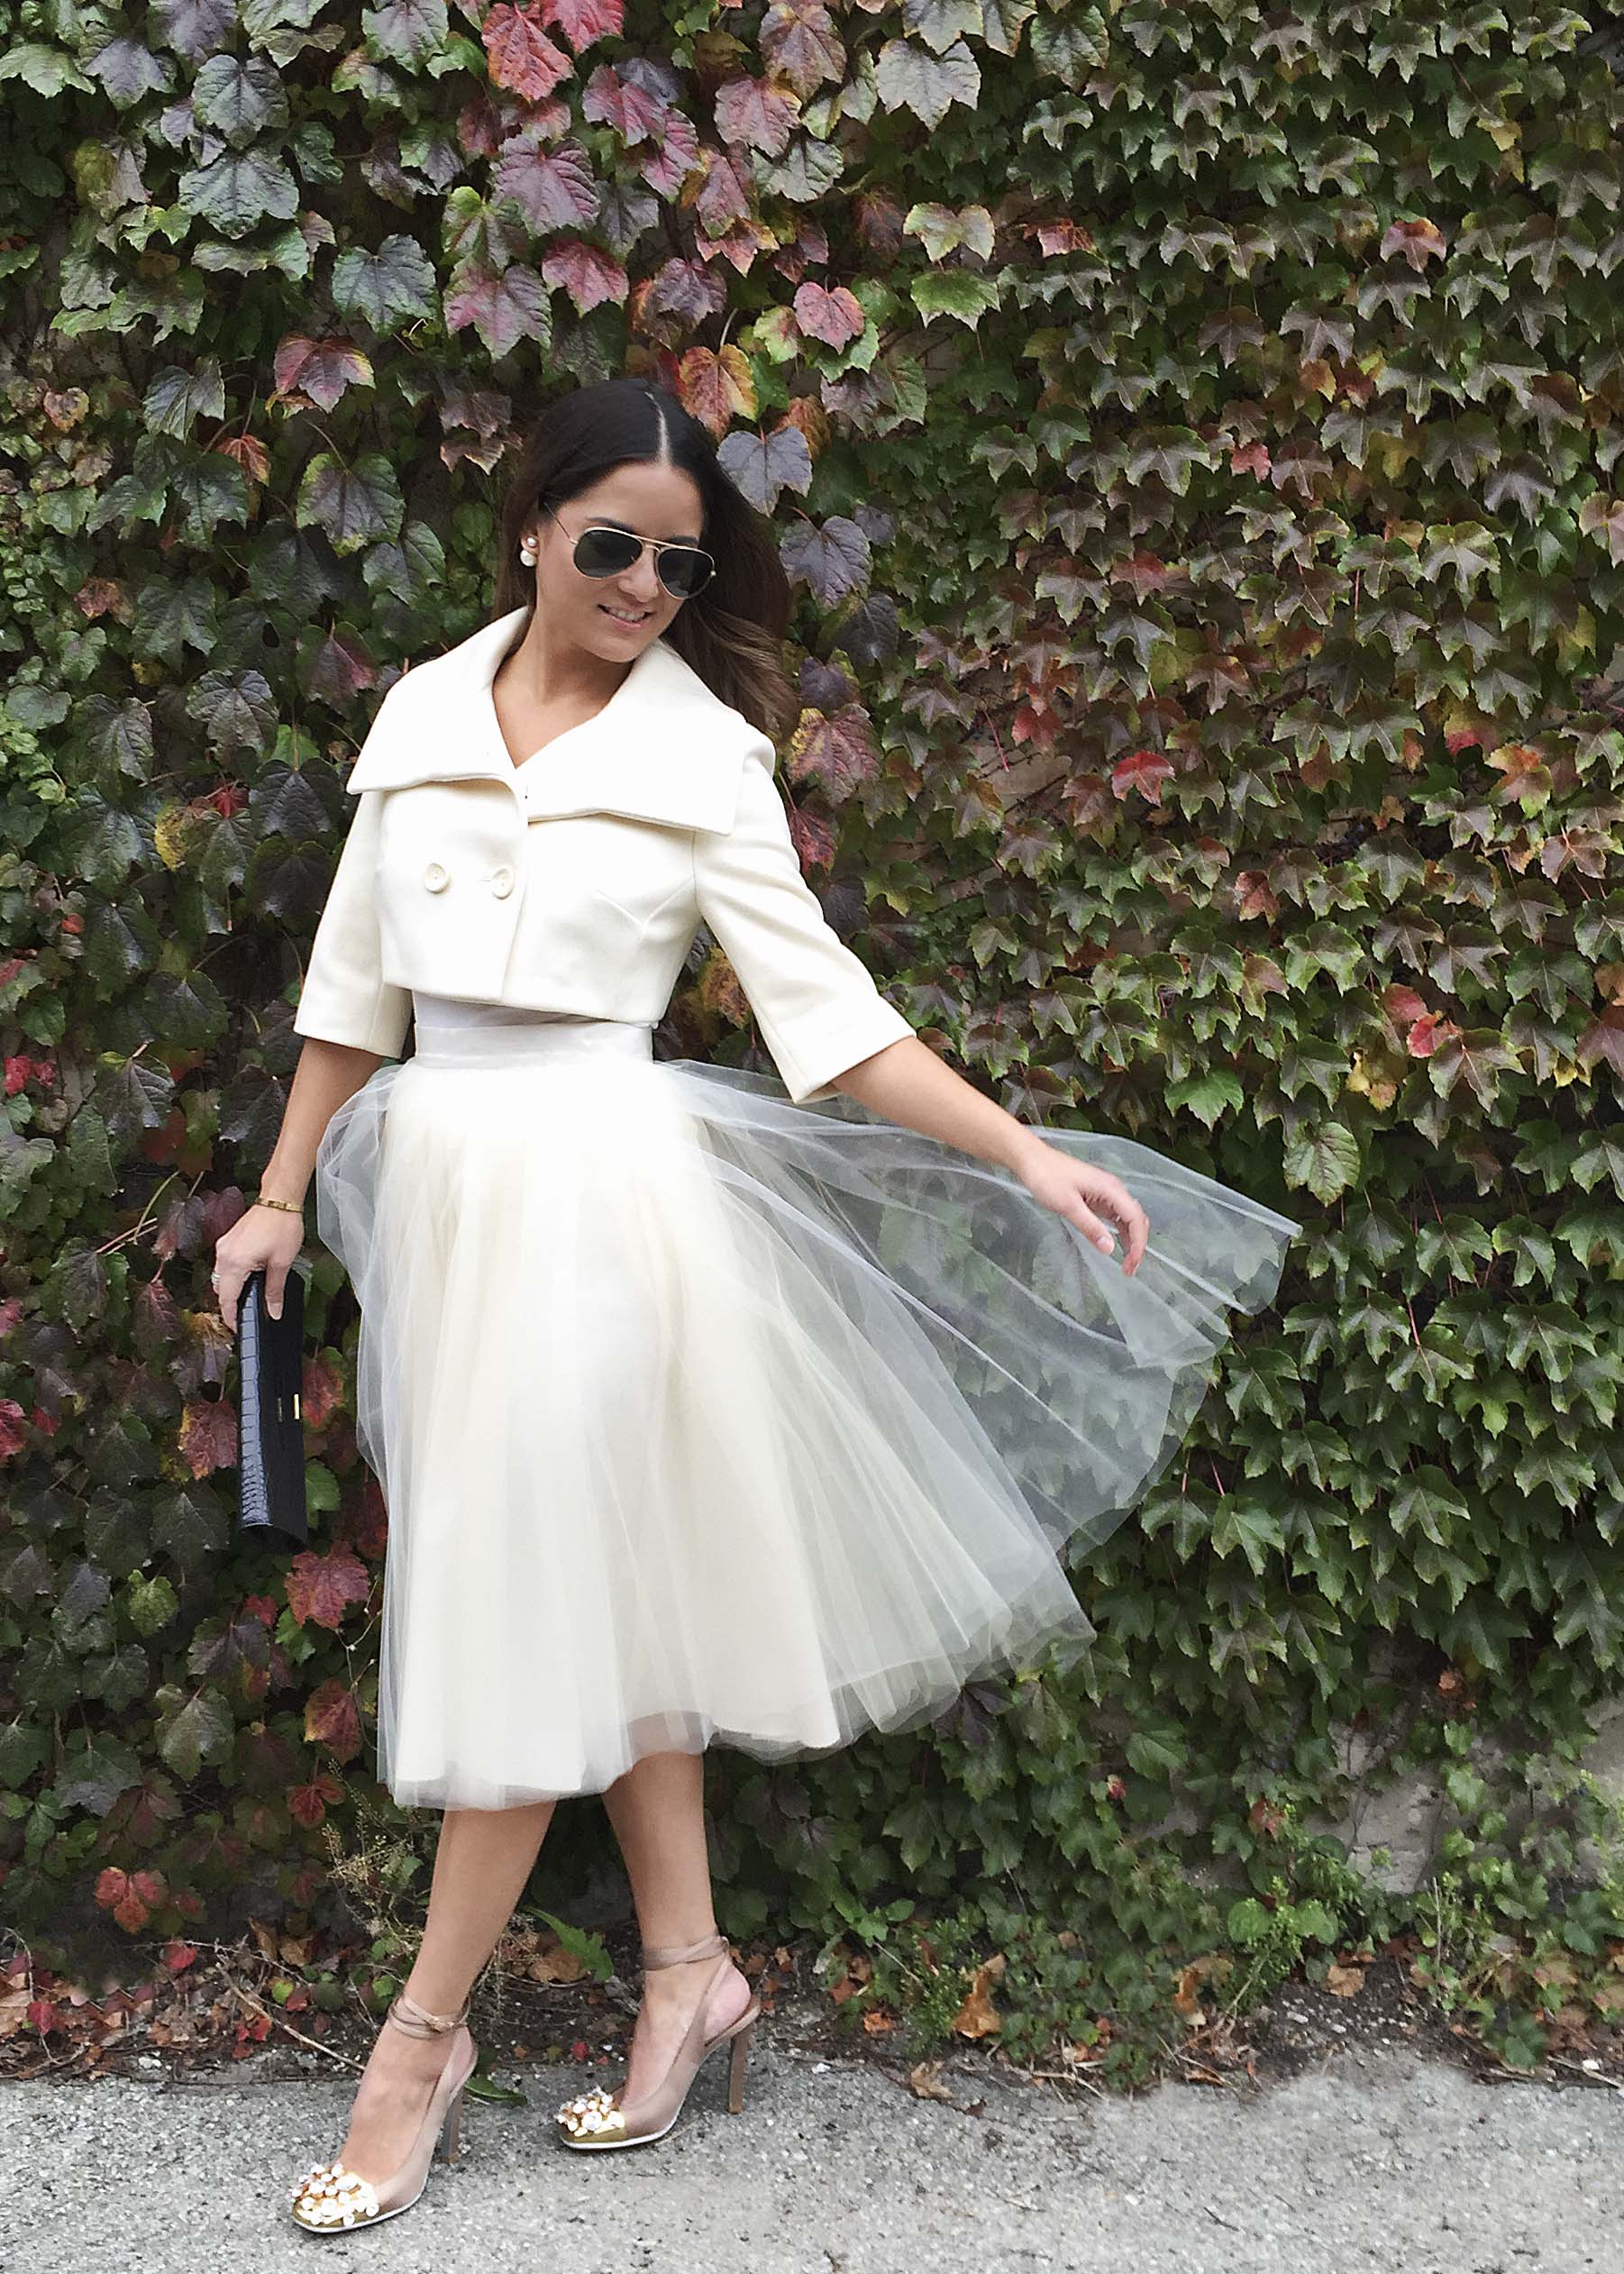 How to Style a Tulle Skirt - Three Easy Tips to Look Your Age